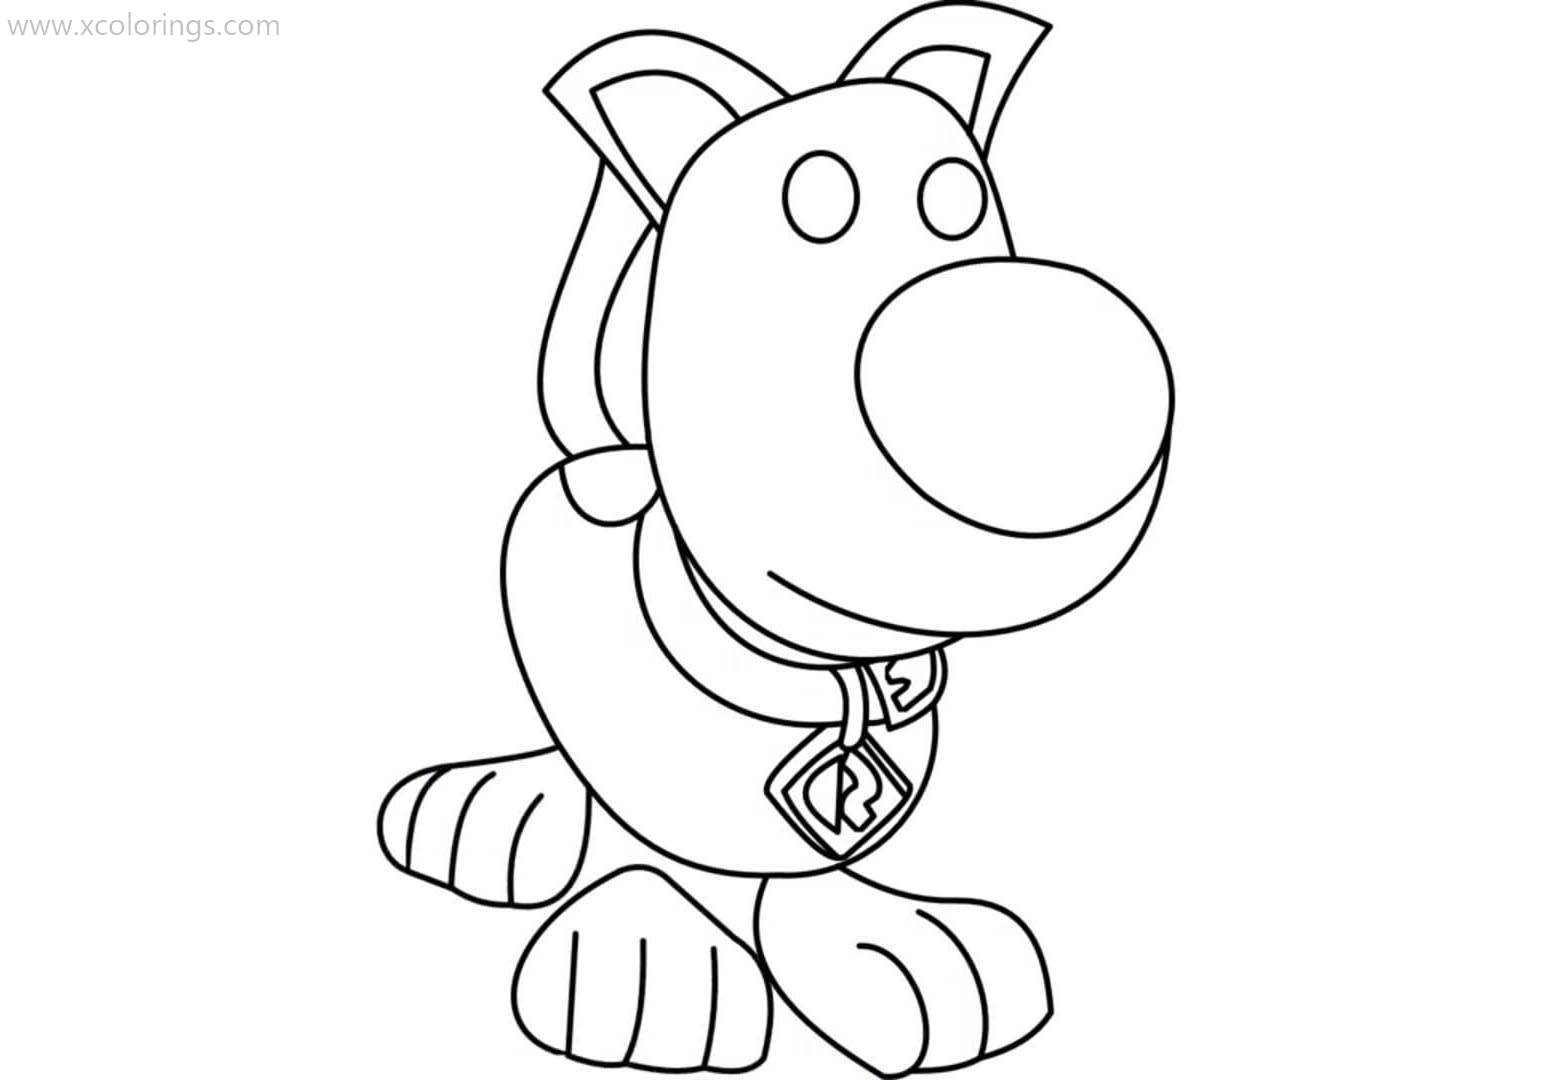 Free Roblox Adopt Me Coloring Pages Scooby Doo printable